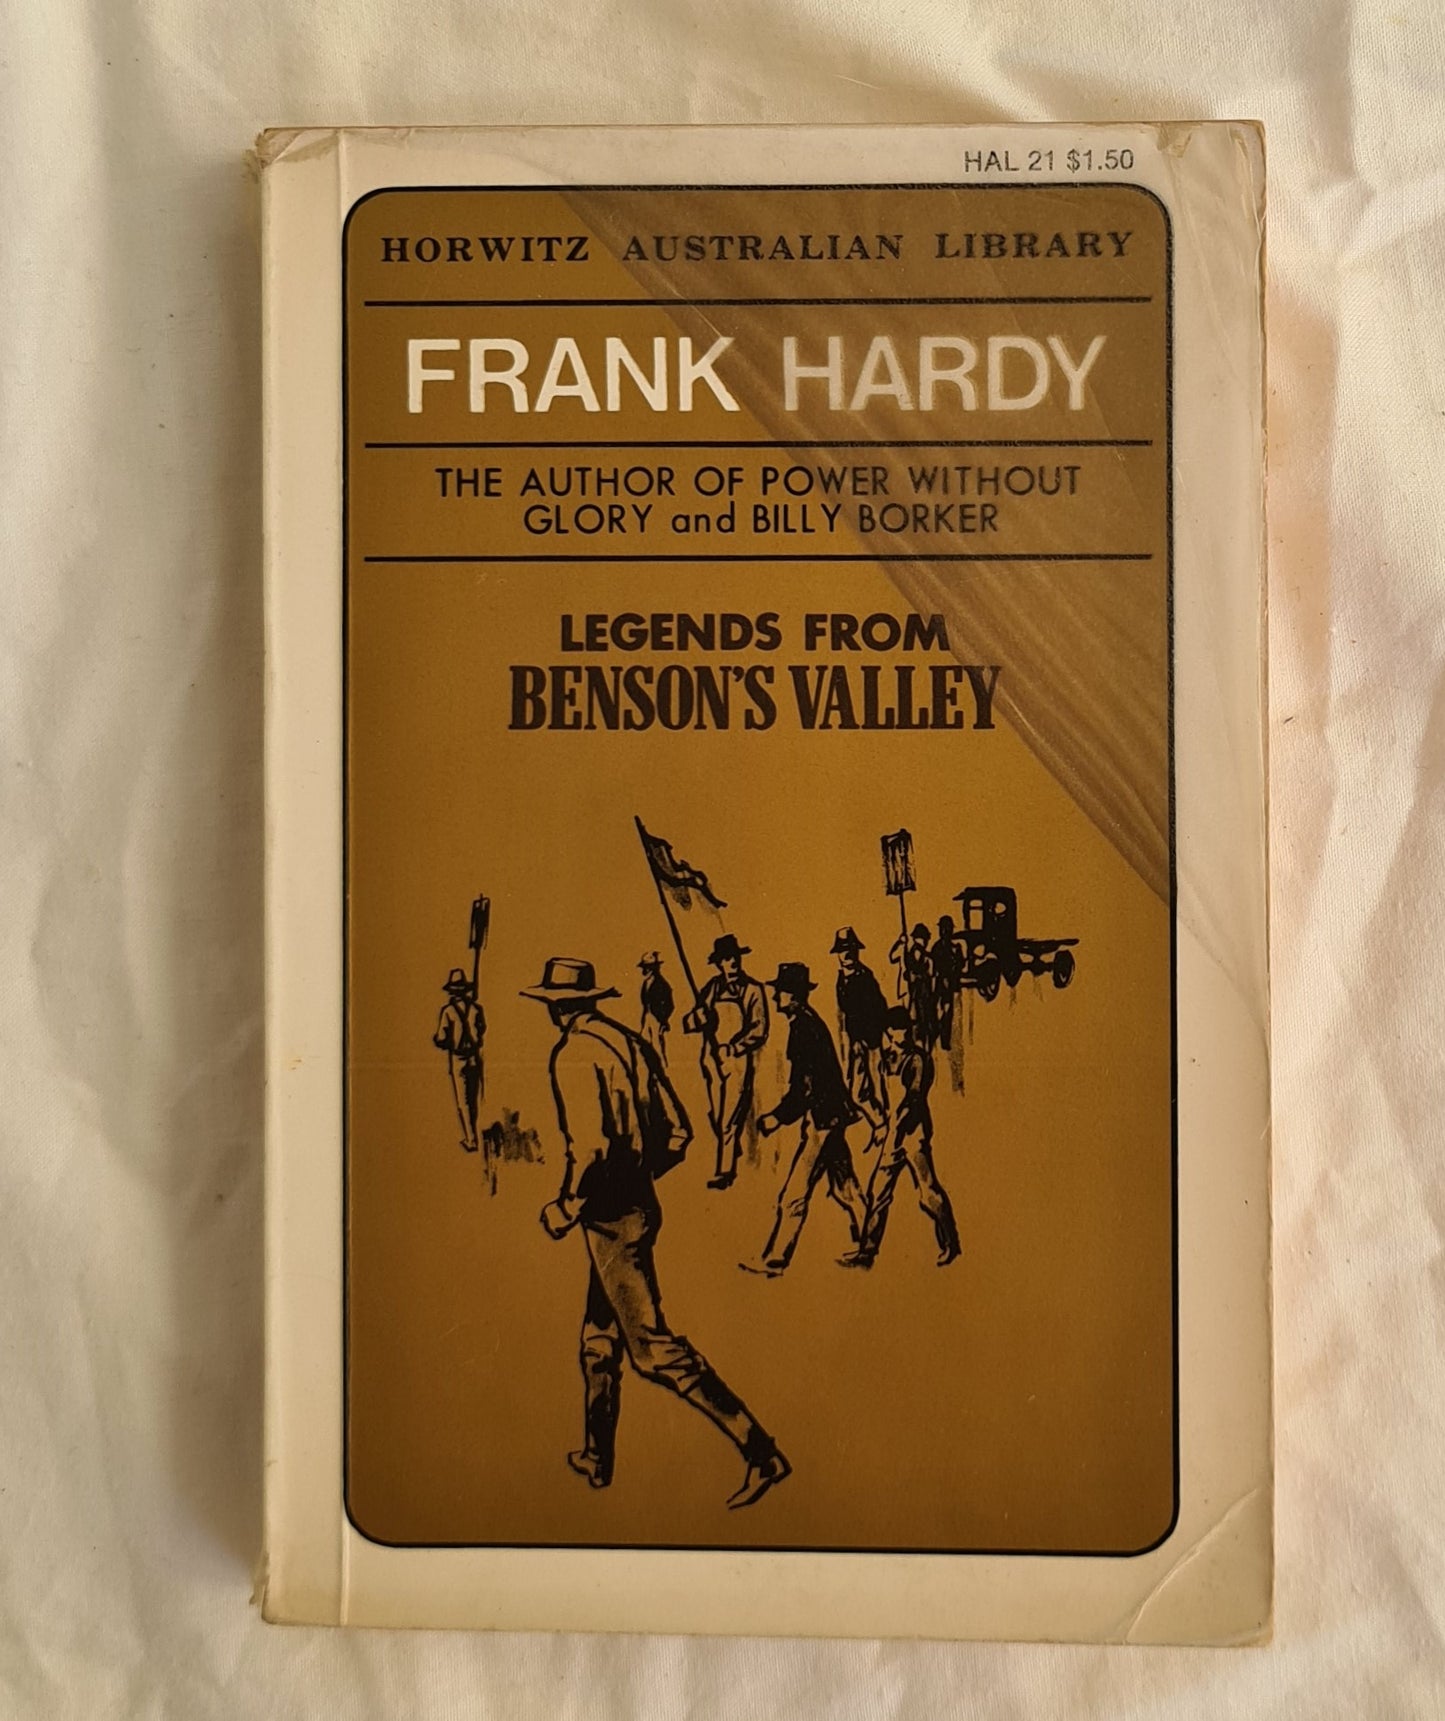 Legends from Benson’s Valley by Frank Hardy